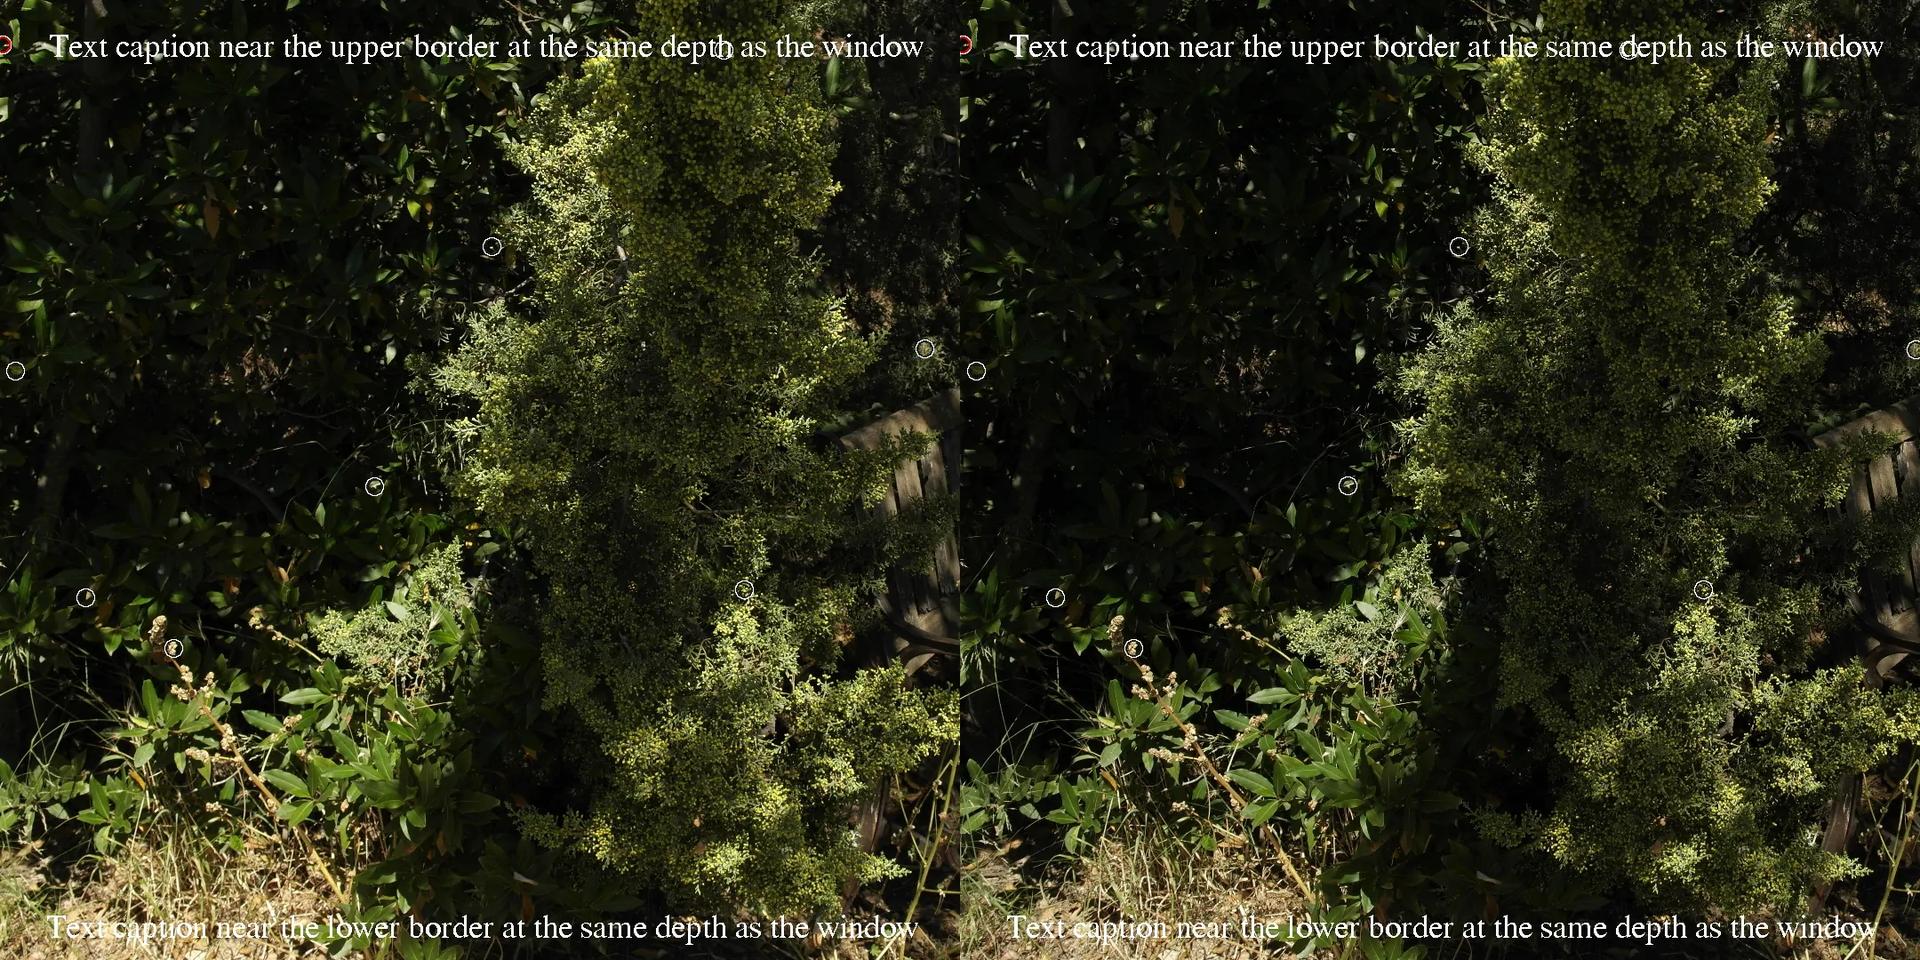 Cropped - Branch into the window - With text captions at window's depth